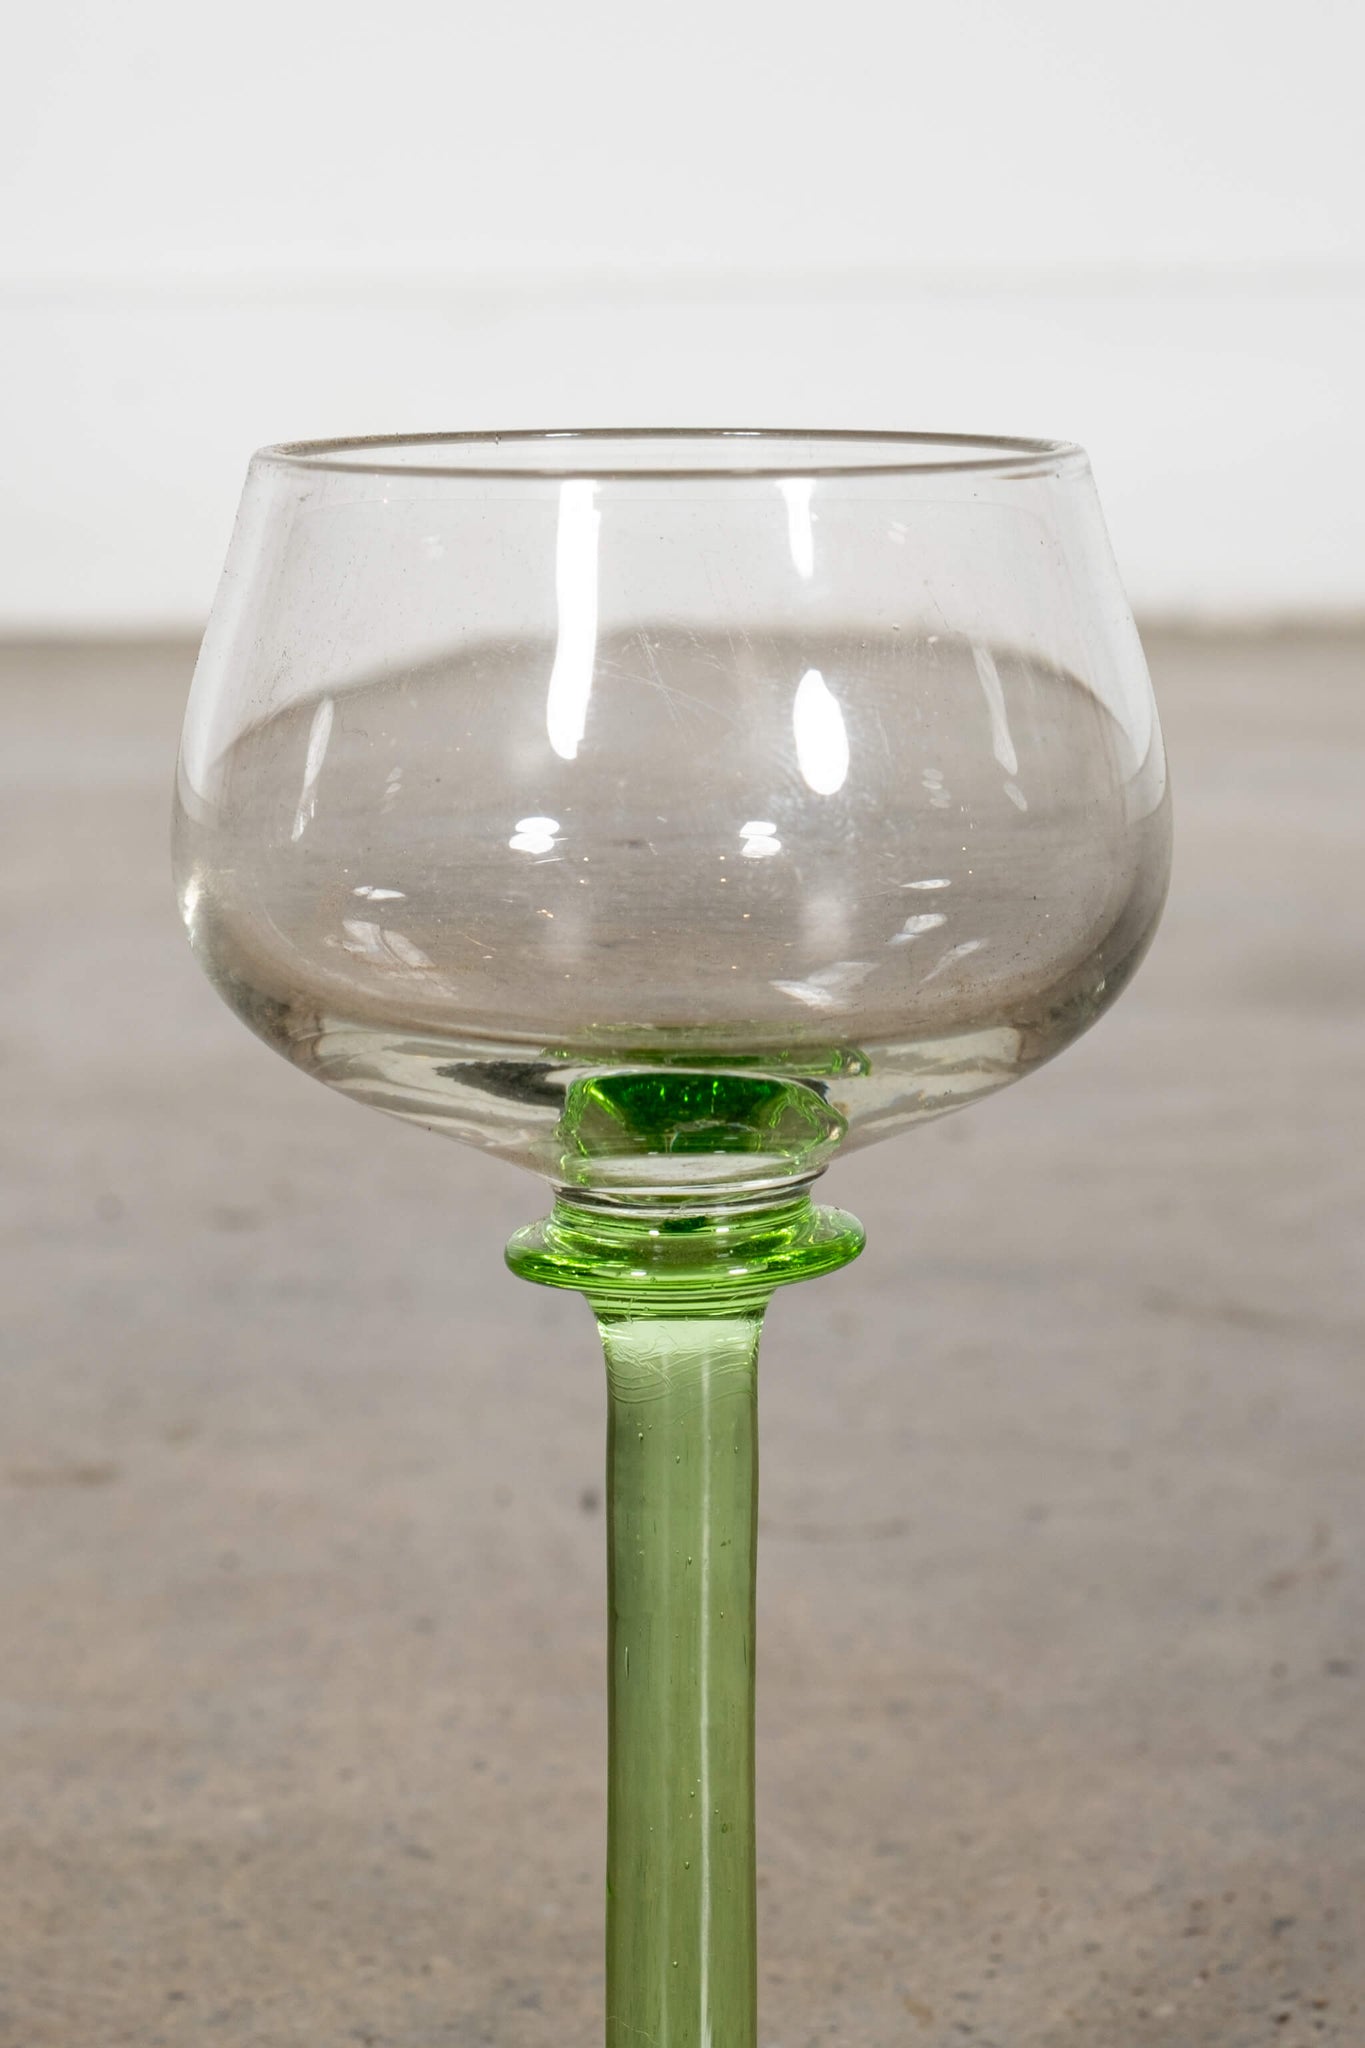 Bonne Choice - Vintage Wine Glasses with Green Stems, each